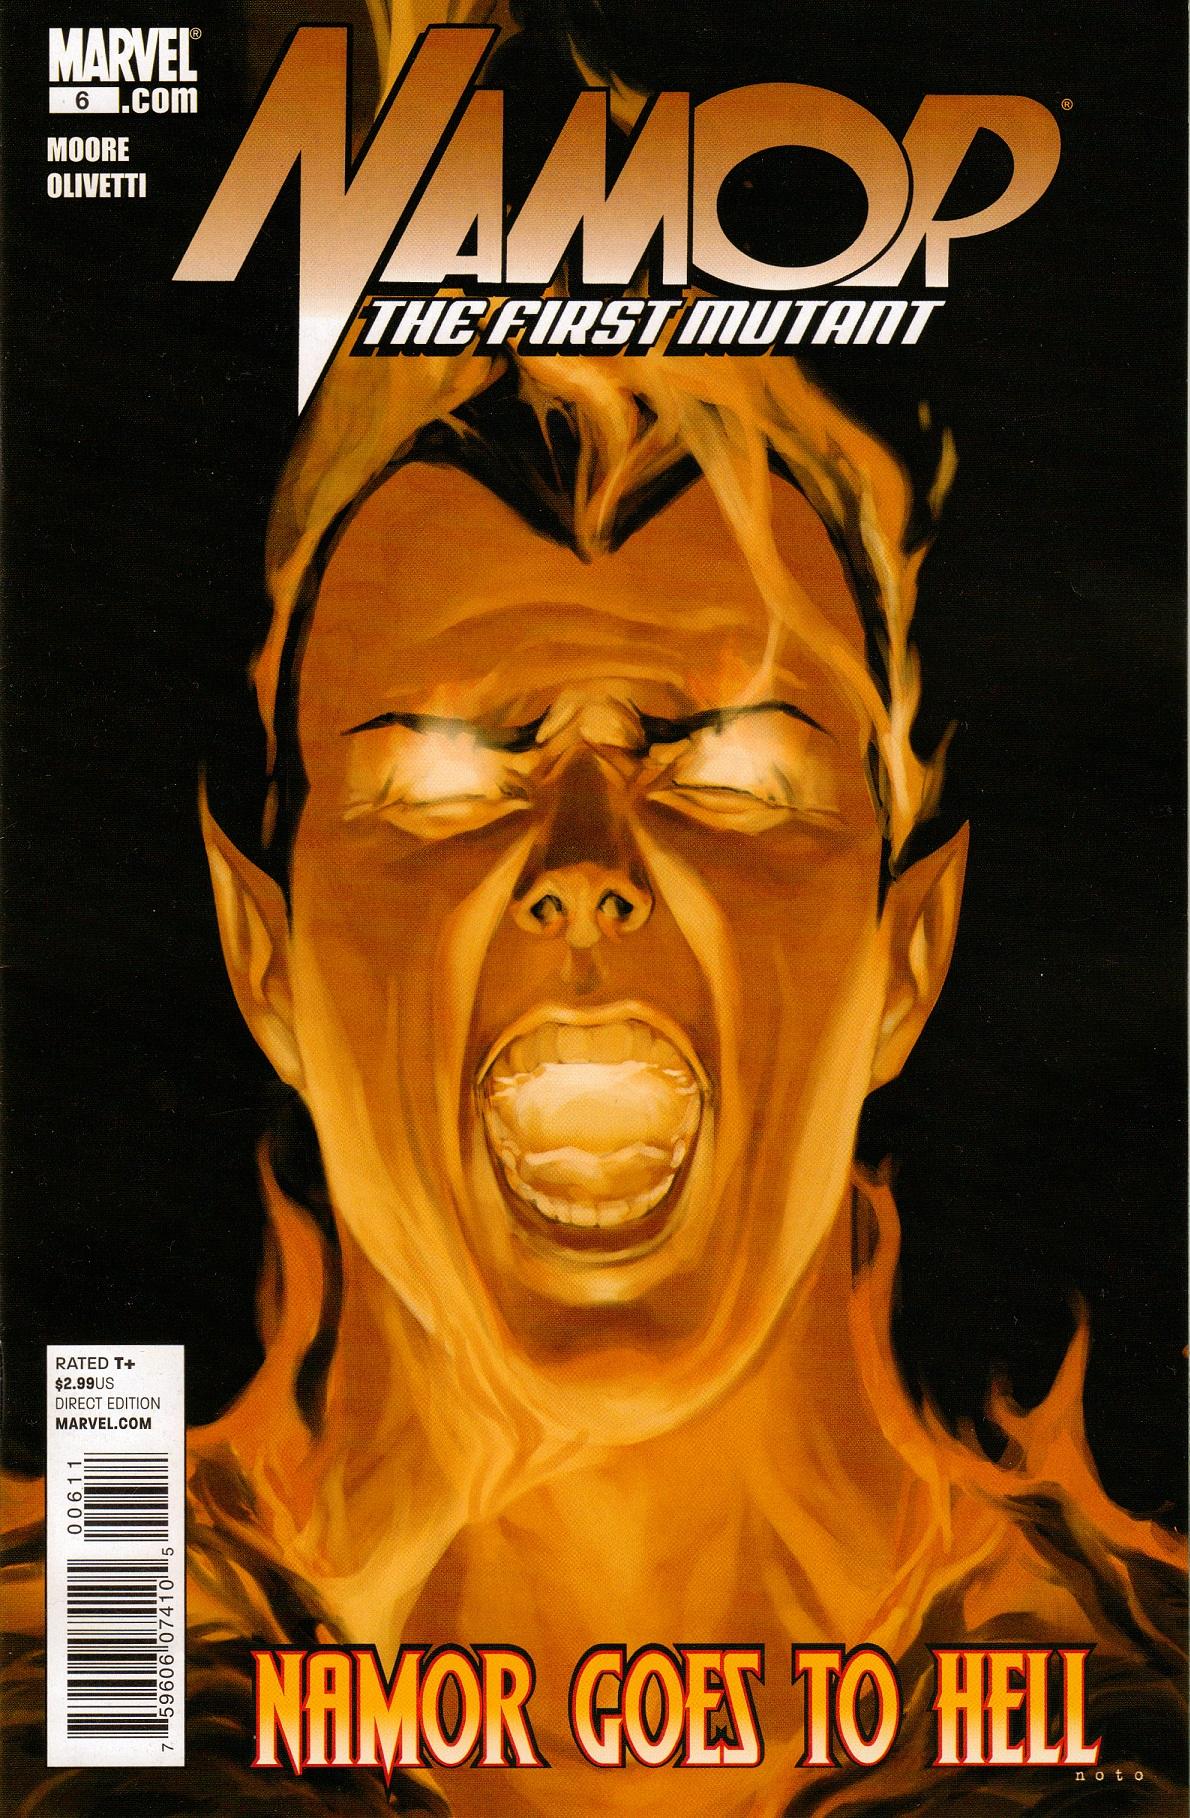 Namor: The First Mutant Vol. 1 #6